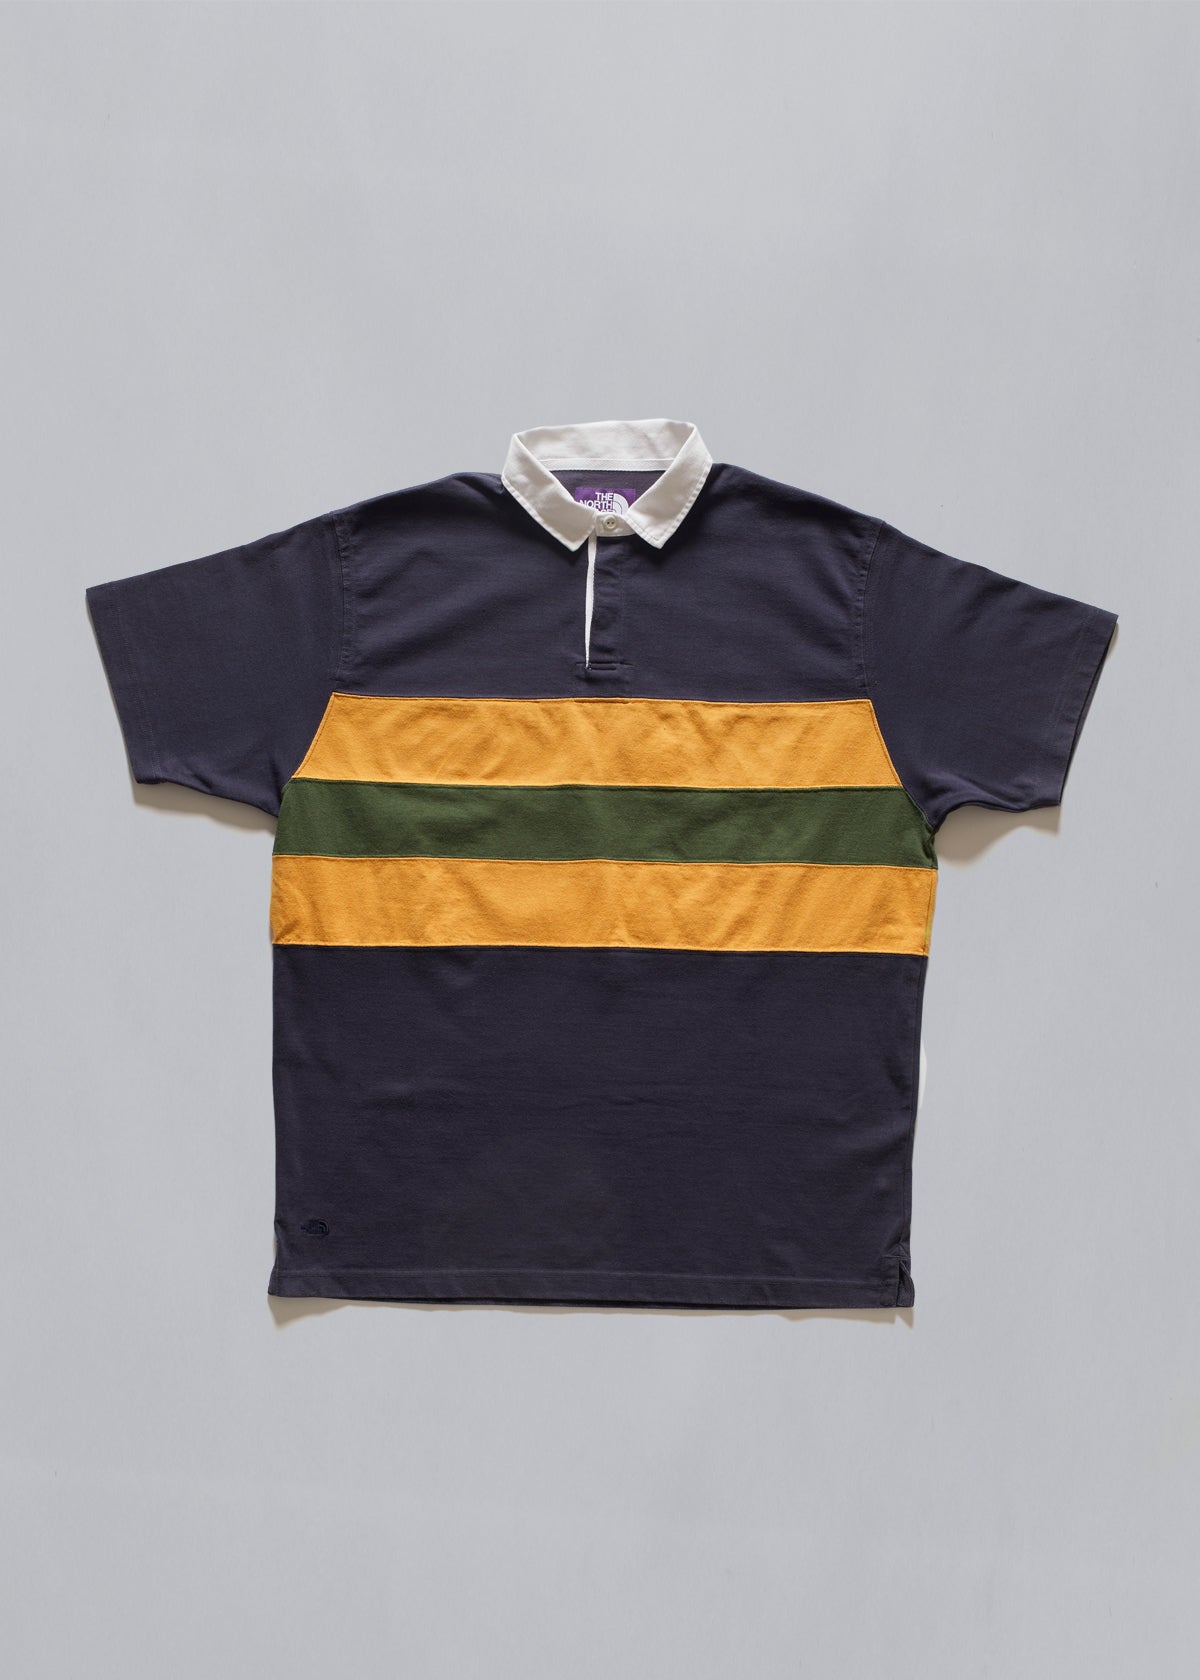 Big Rugby Shirt SS2018 - Large - The Archivist Store